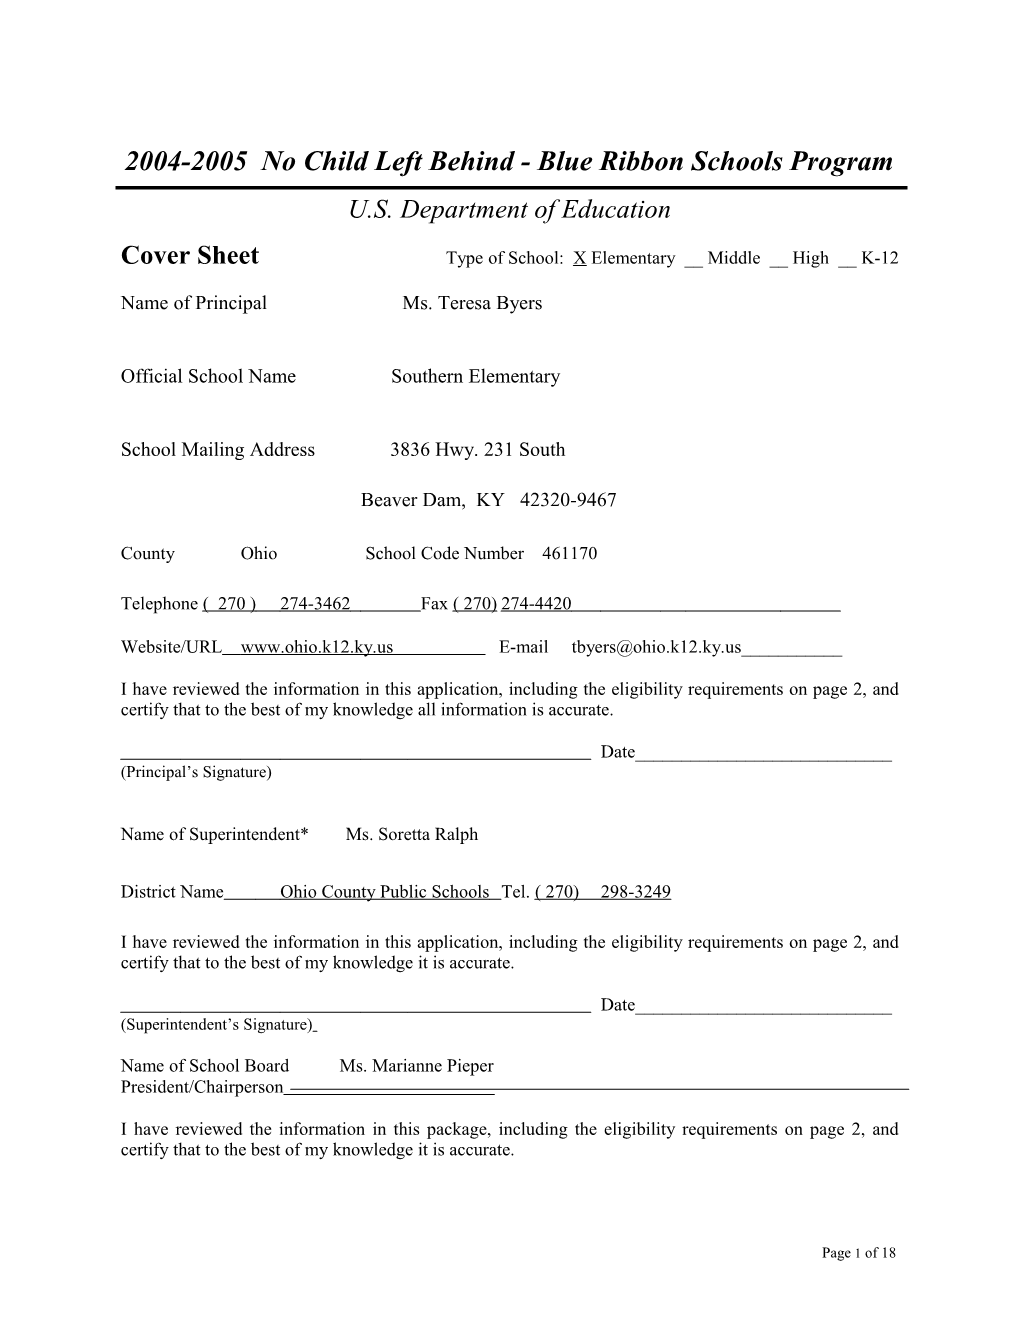 Southern Elementary School Application: 2004-2005, No Child Left Behind - Blue Ribbon Schools